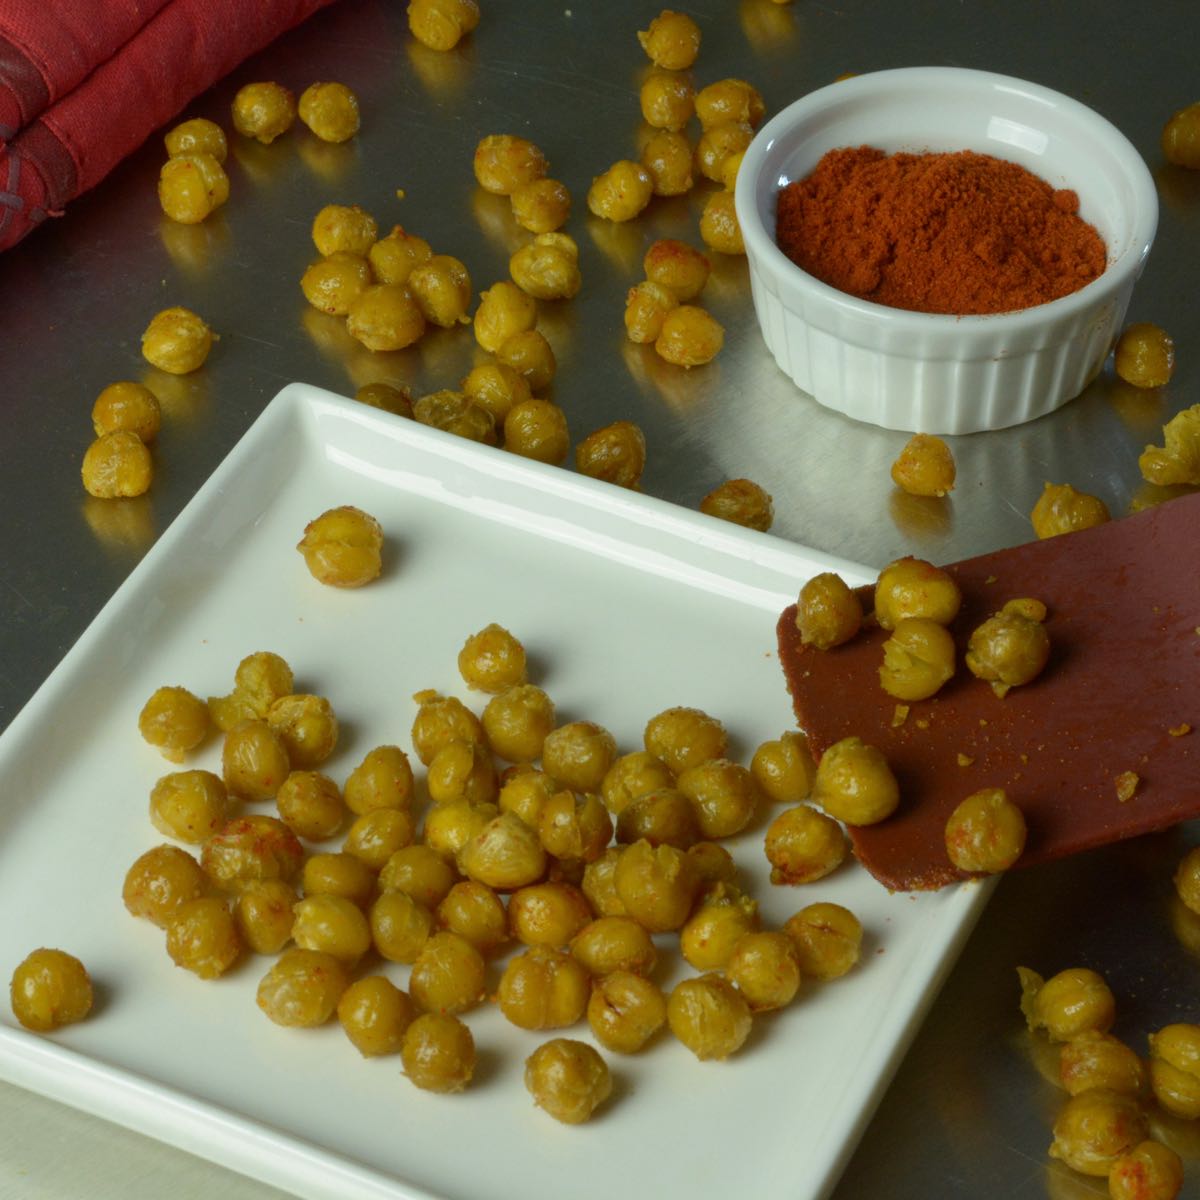 Roasted Chickpeas on a plate with a dish of paprika.